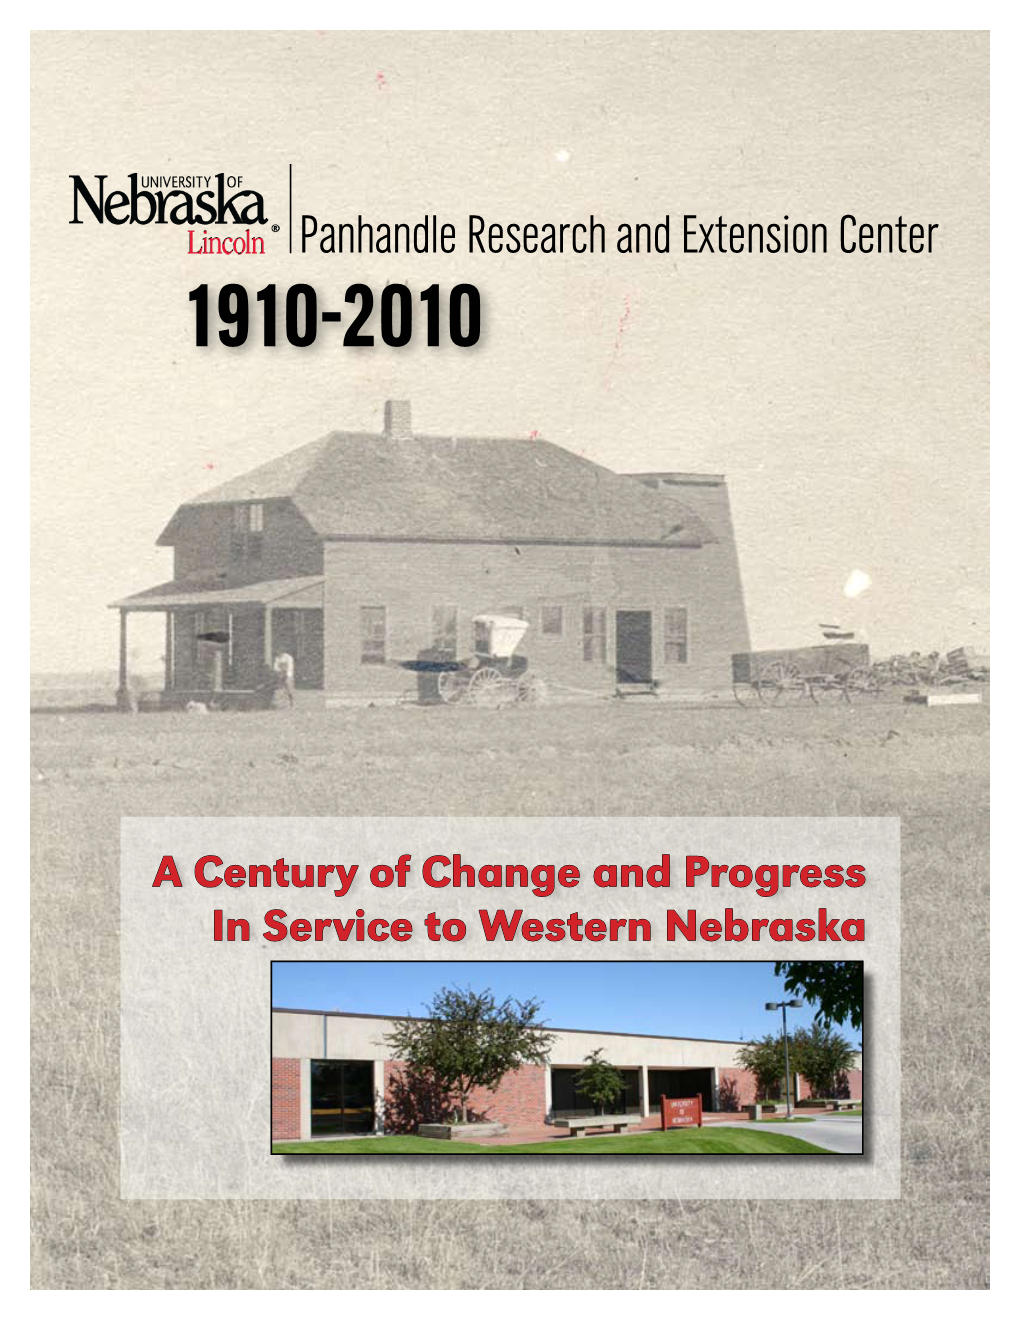 Panhandle Research and Extension Center 1910-2010